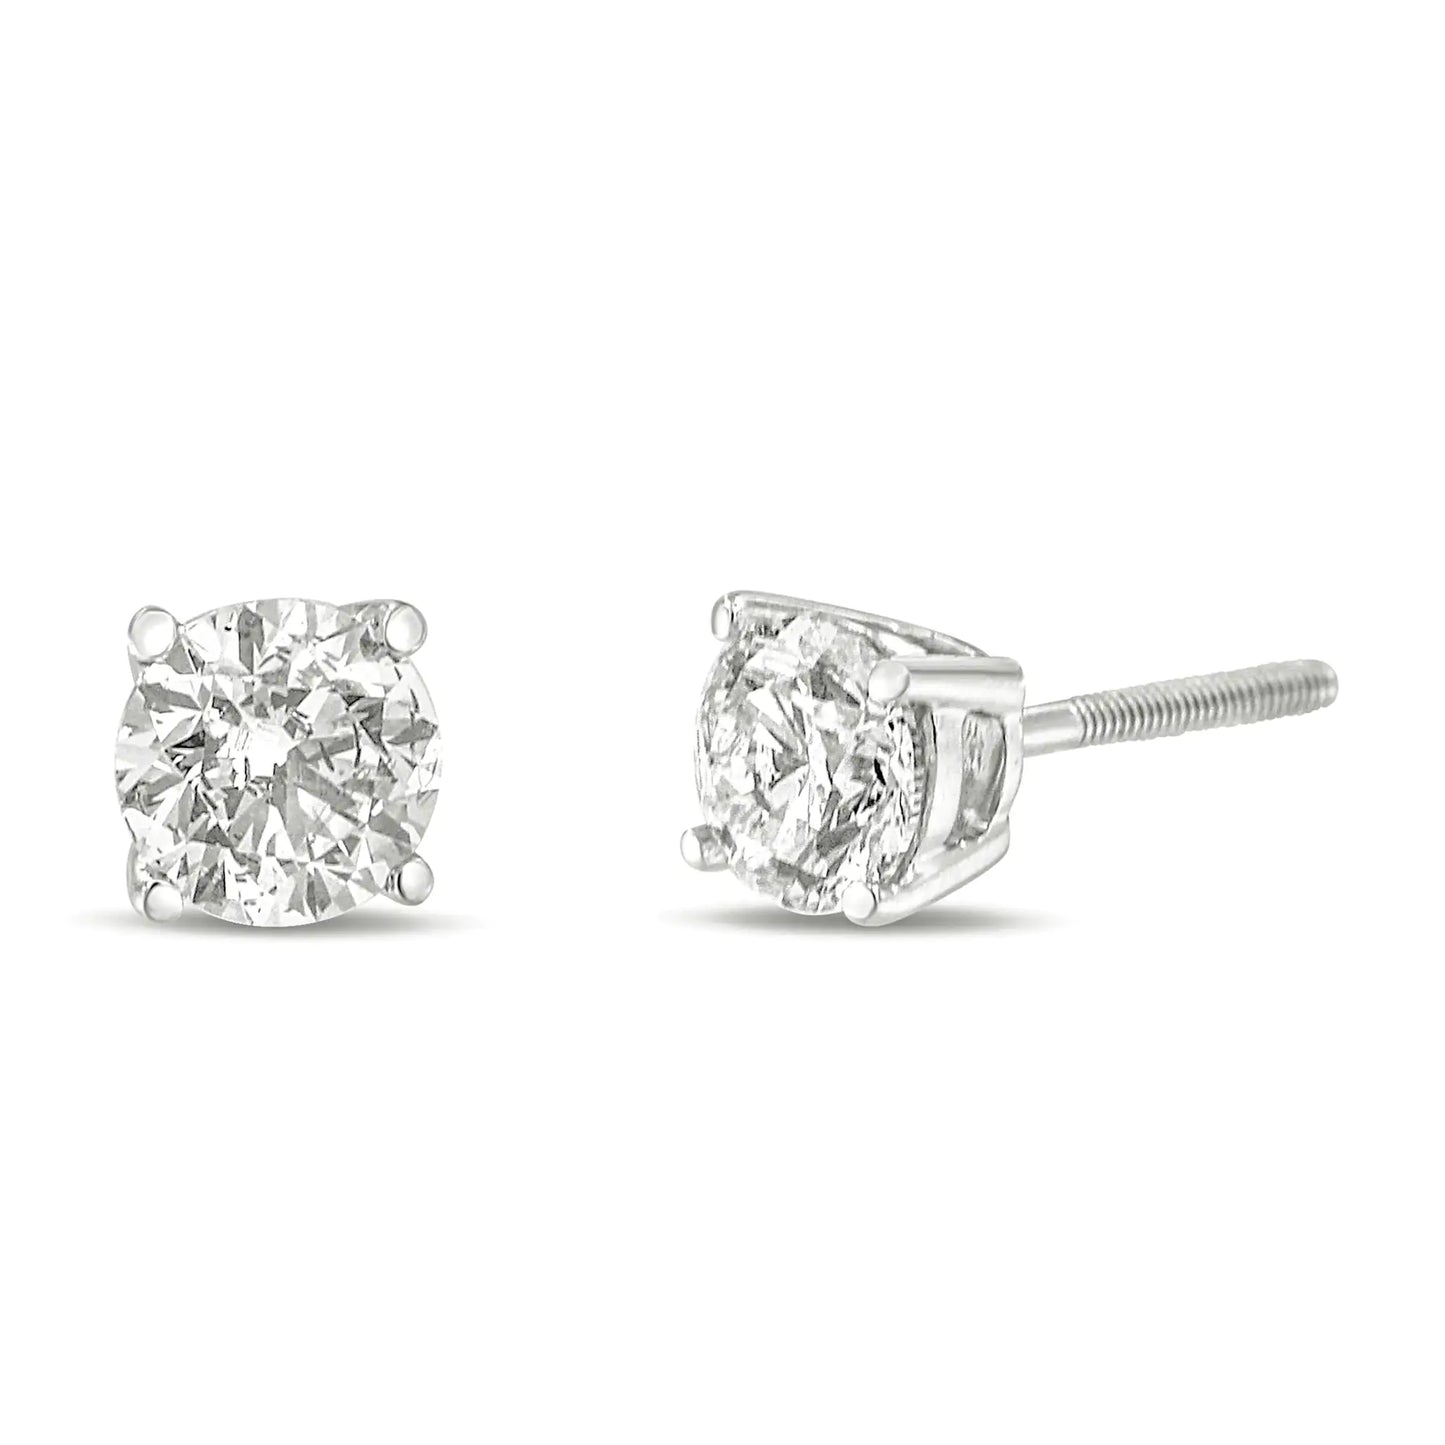 Classic Solitaire stud earrings made of 14-carat round diamond-cut gold weighing 1.0 carats with a lab-grown white diamond with 4 prongs